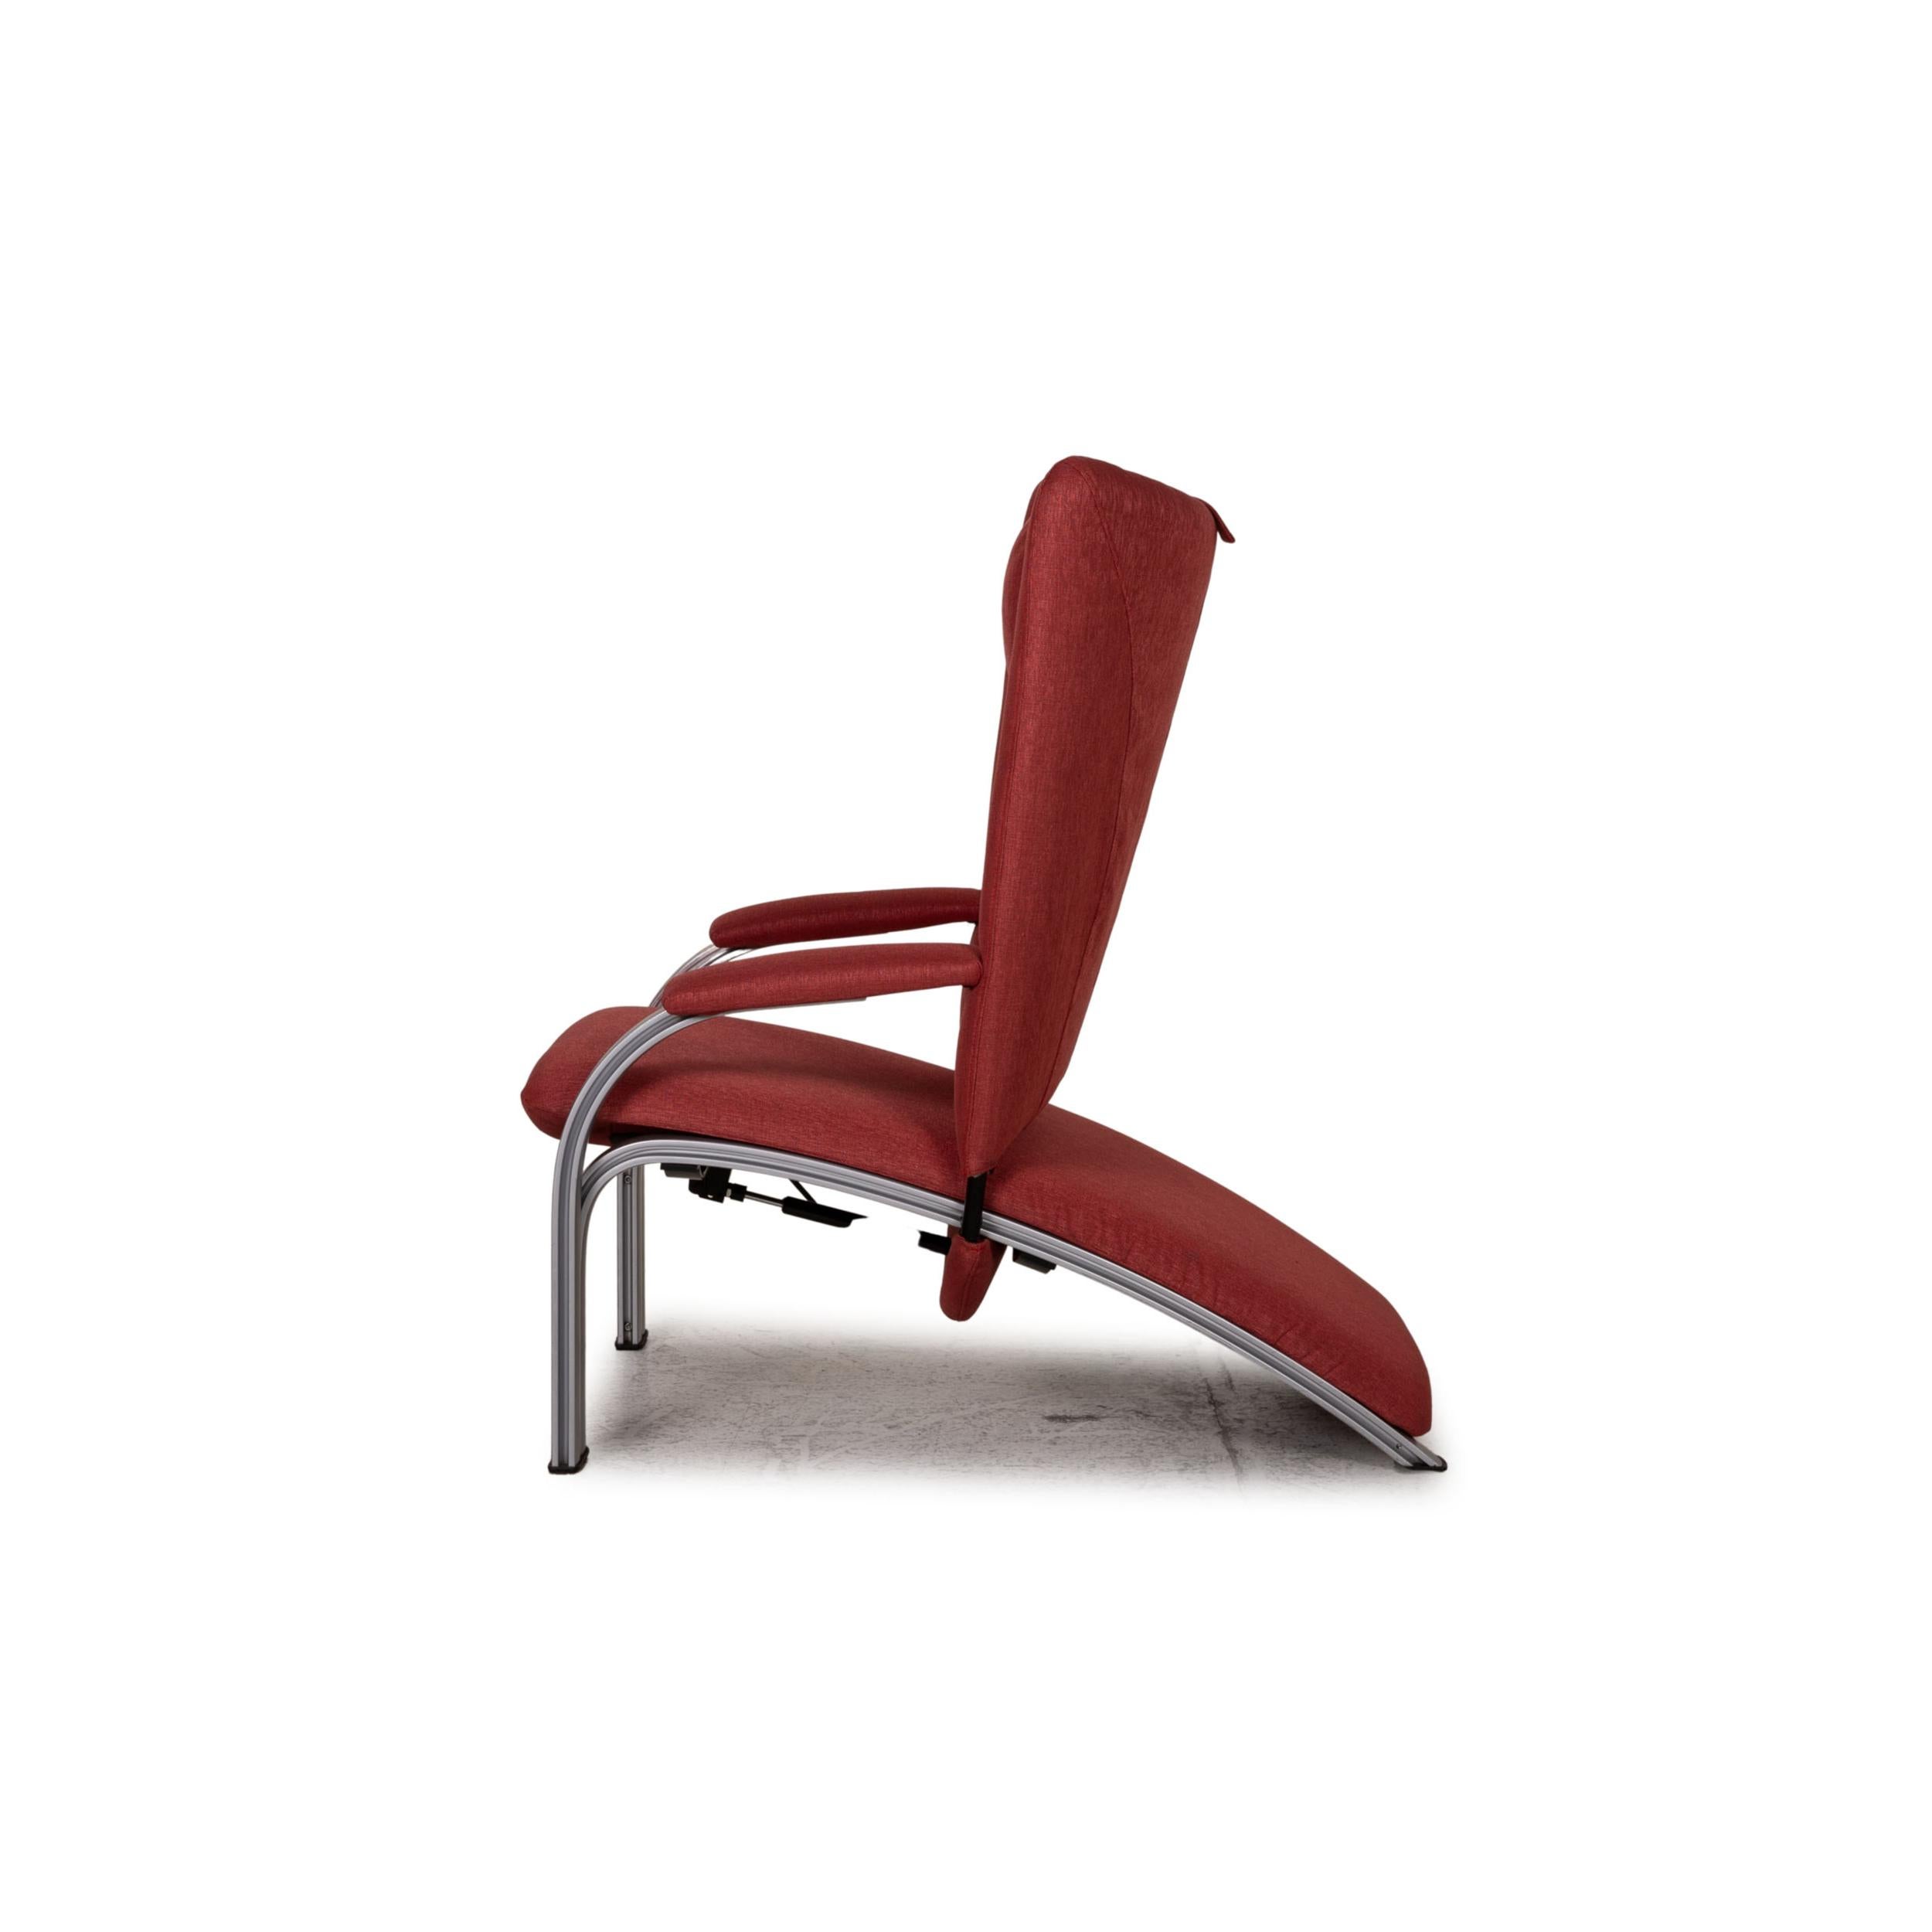 WK Wohnen Spot 698 Armchair Fabric Red Function Relaxation Function For Sale 1